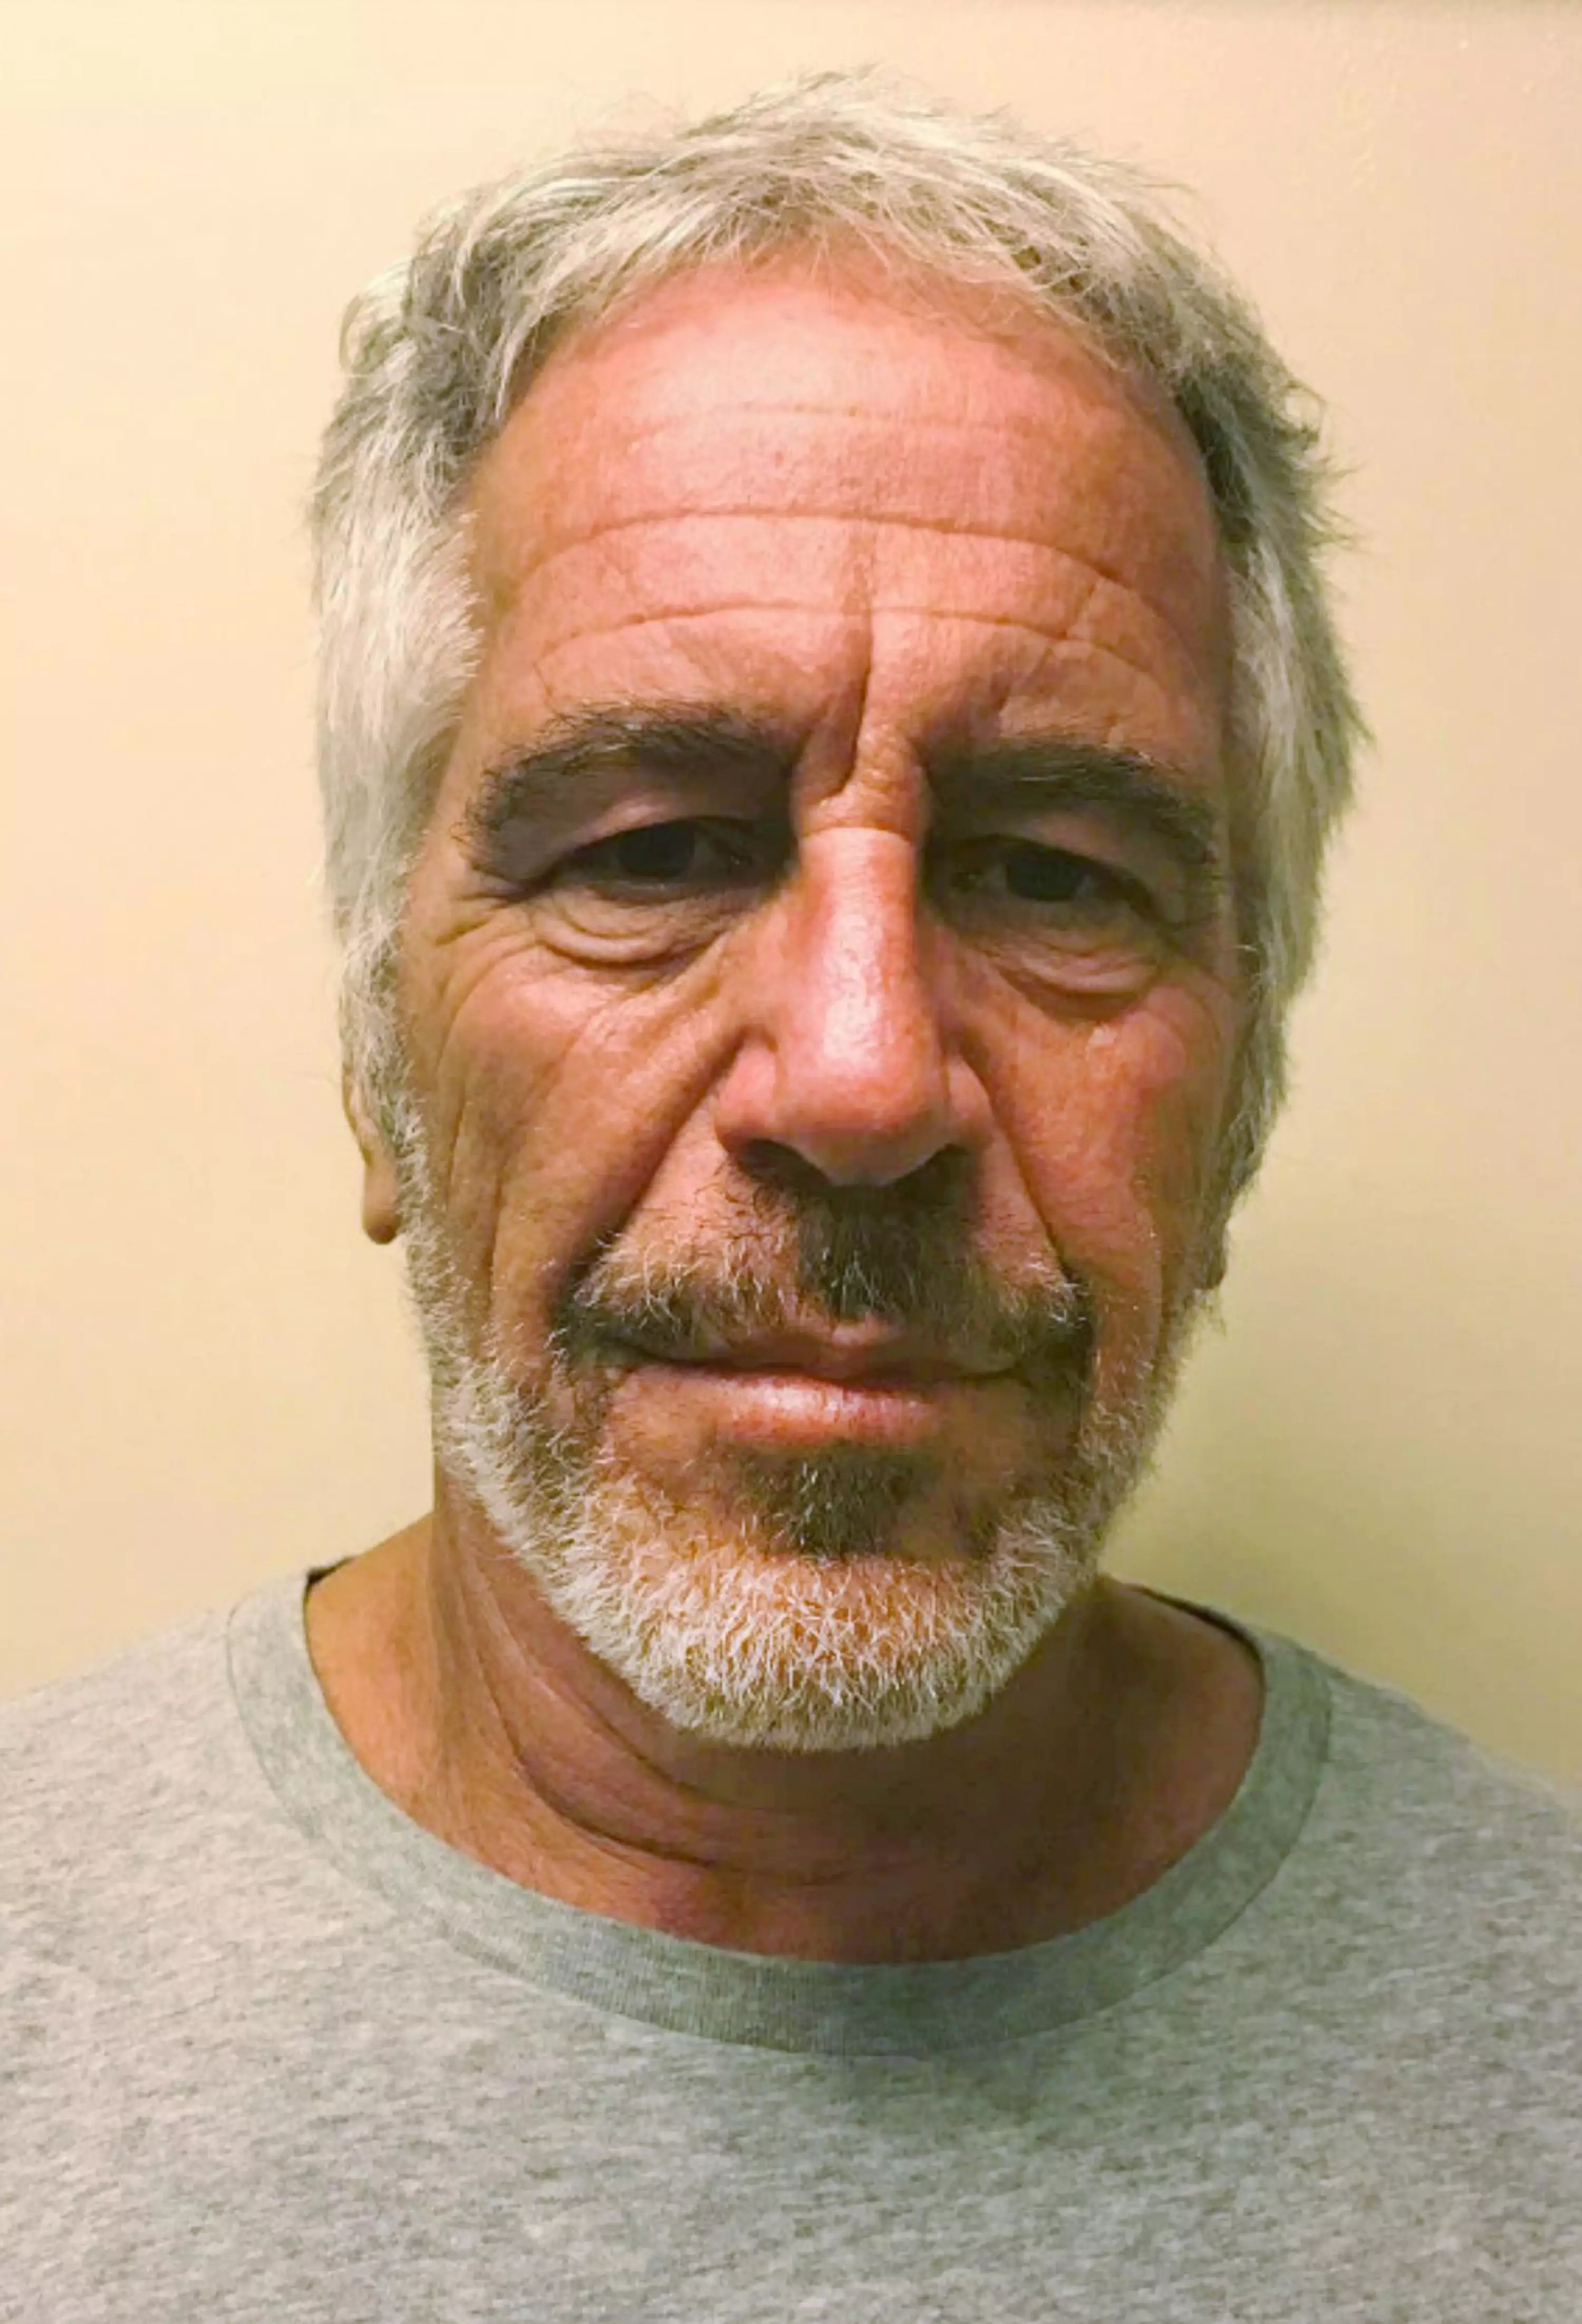 Epstein died in his cell on 10 August 2019.